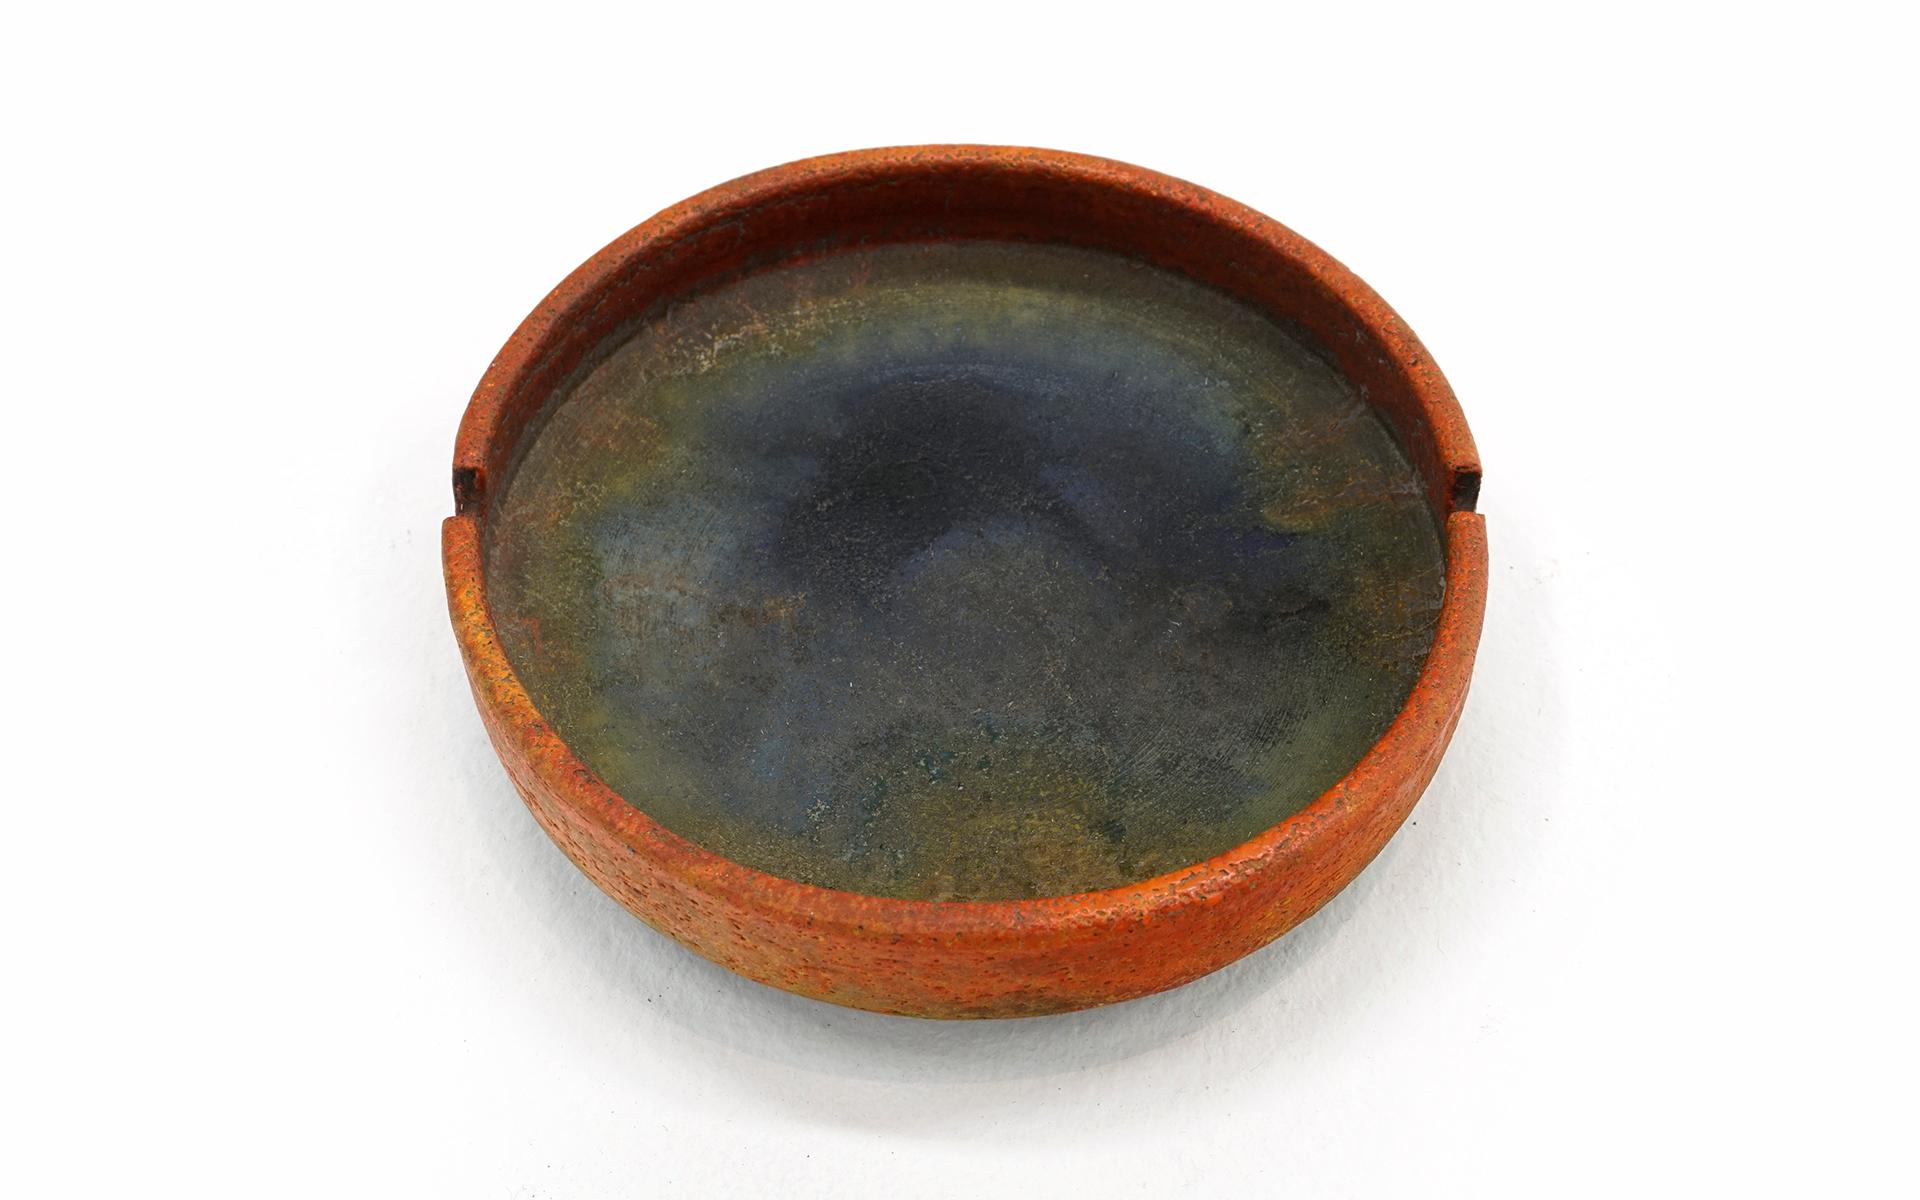 Round Ceramic Ash Tray by Marcello Fantoni. Burnt orange color exterior and black / gray interior. No chips, cracks or repairs. Some signs of wear to inside but no distractions. Signed Fantoni, Italy to the underside.